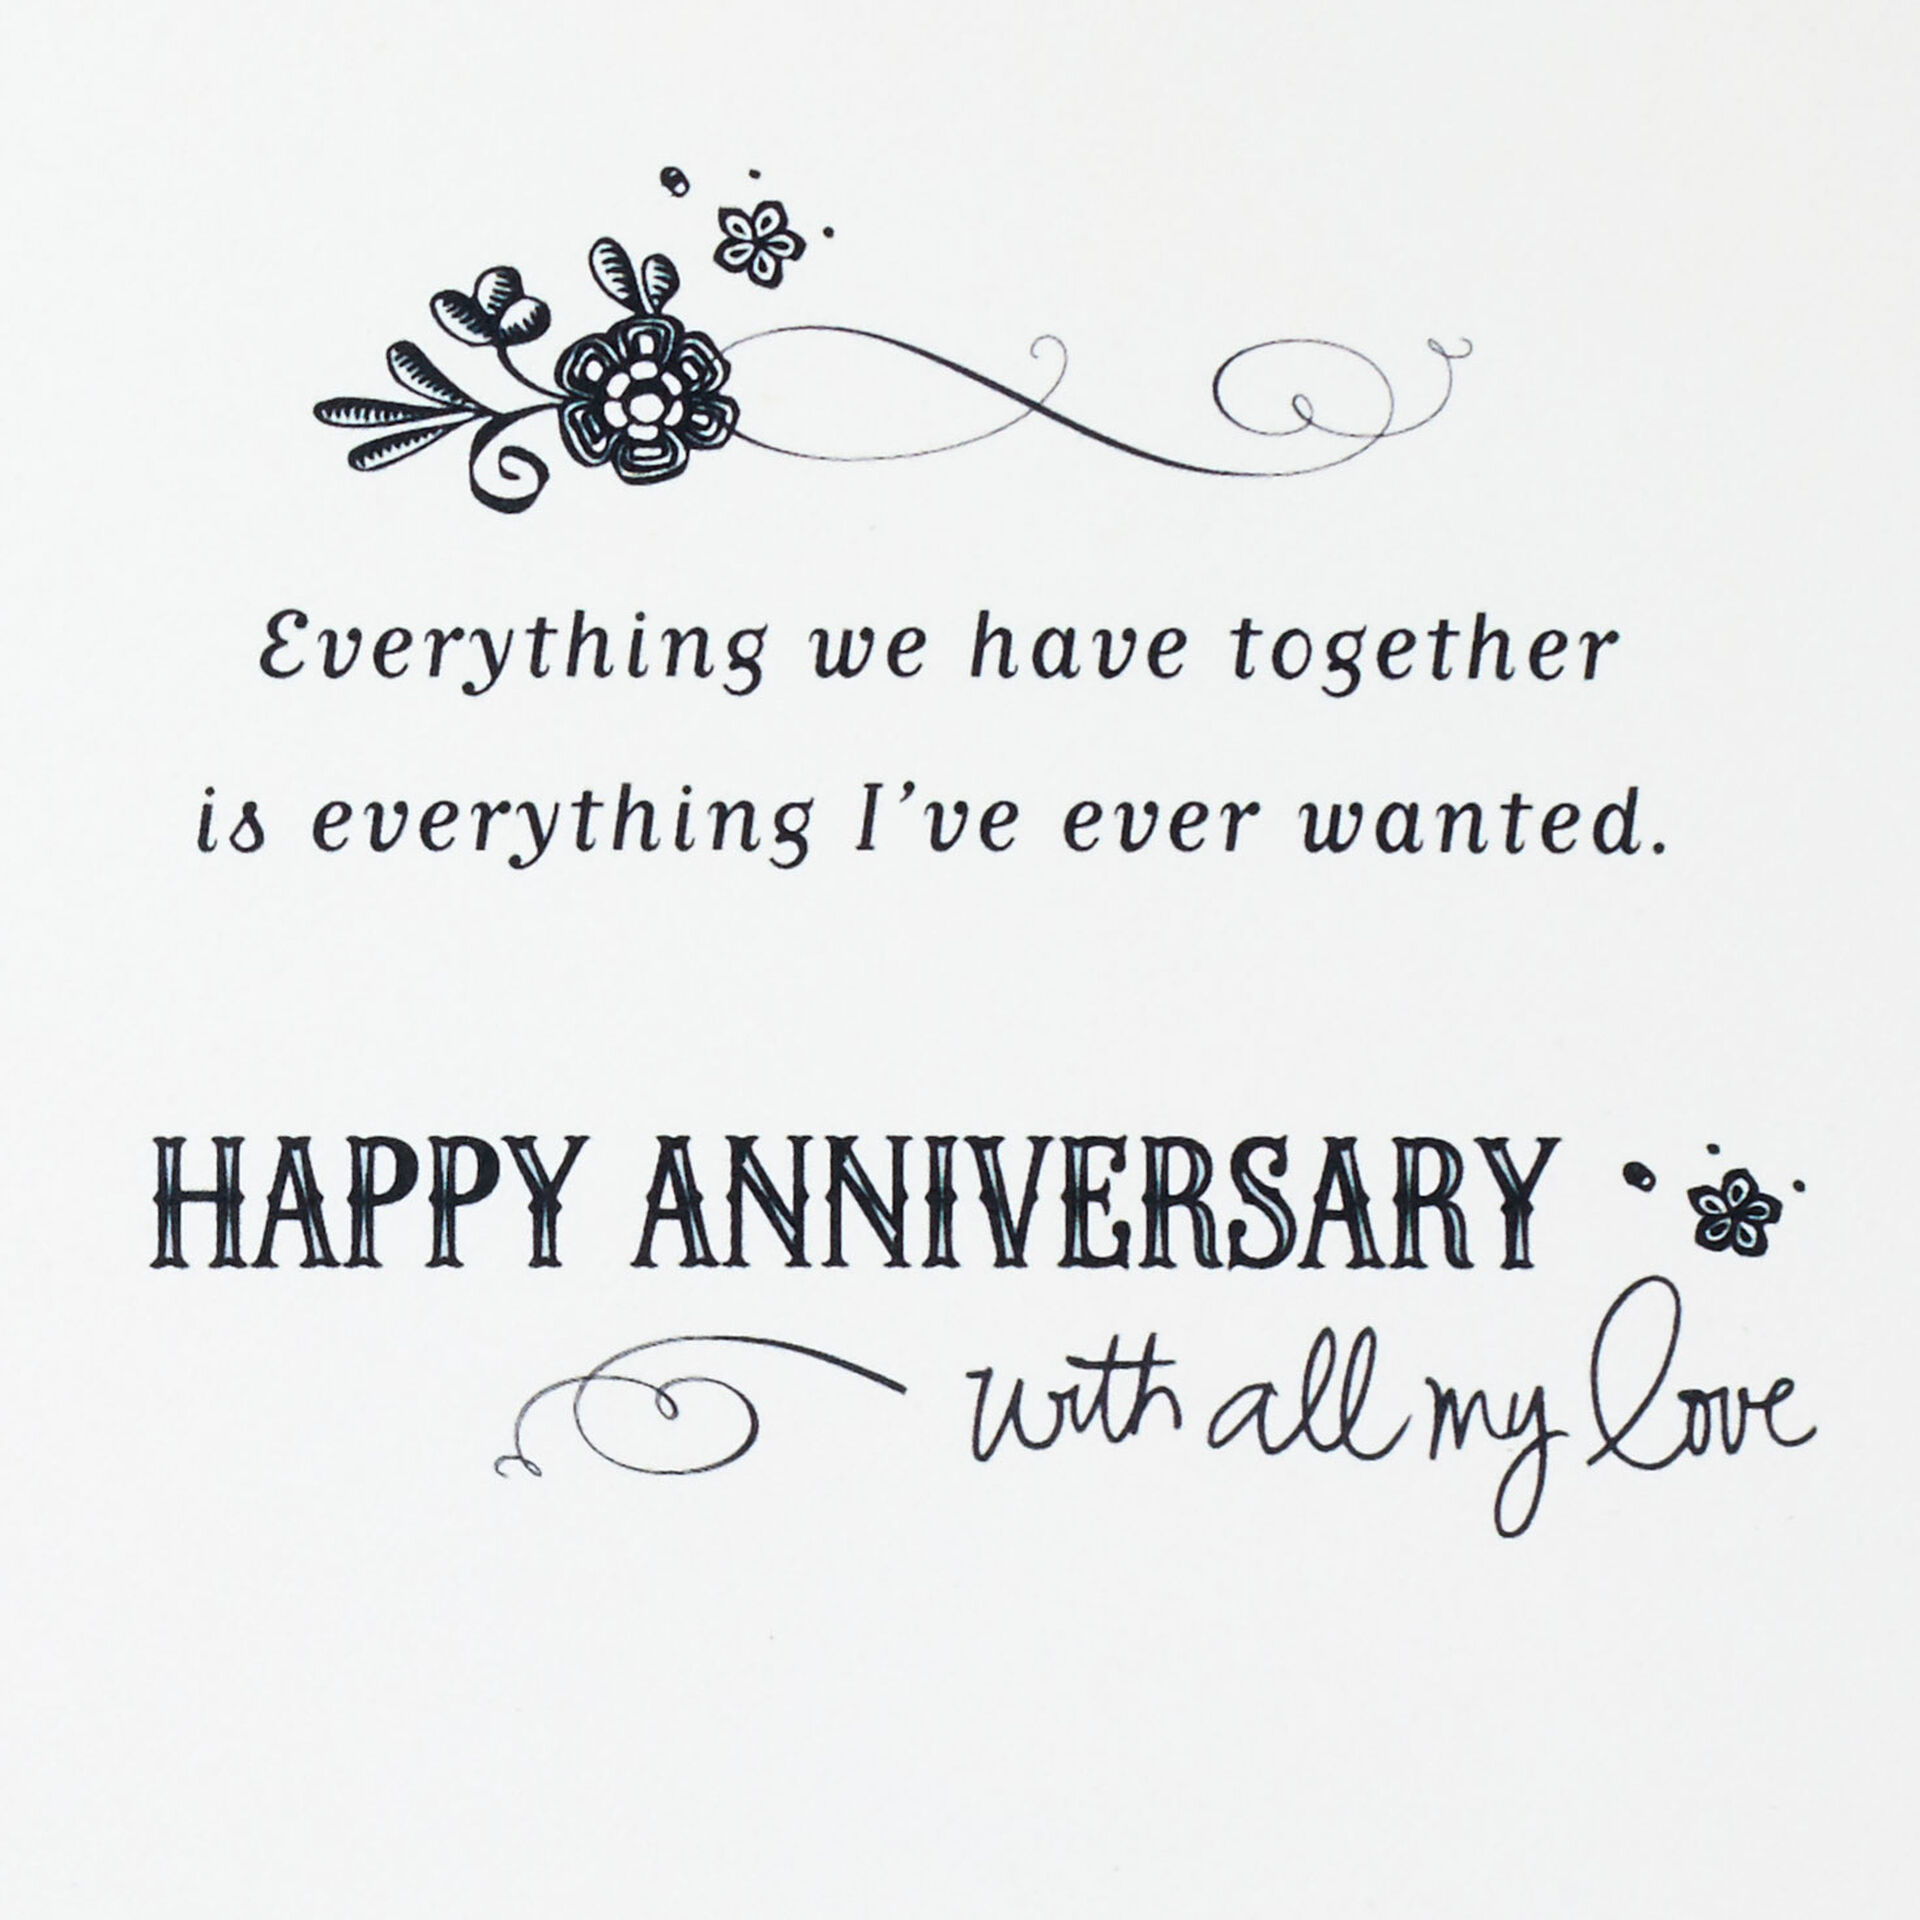 Mickey-Mouse-and-Minnie-Mouse-Anniversary-Card_699AVY9983_02